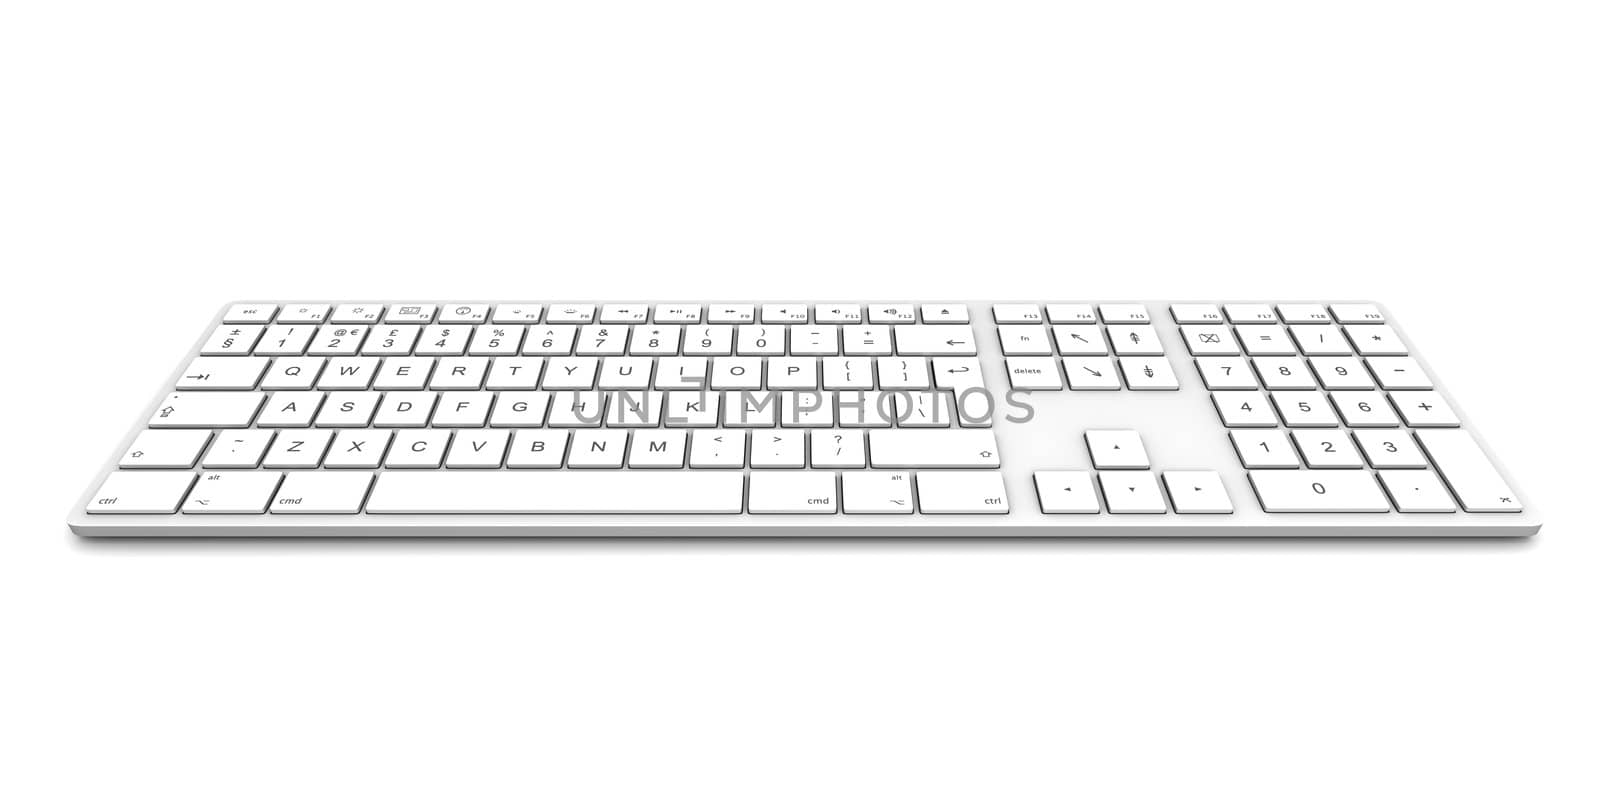 Computer keyboard isolated on white background.